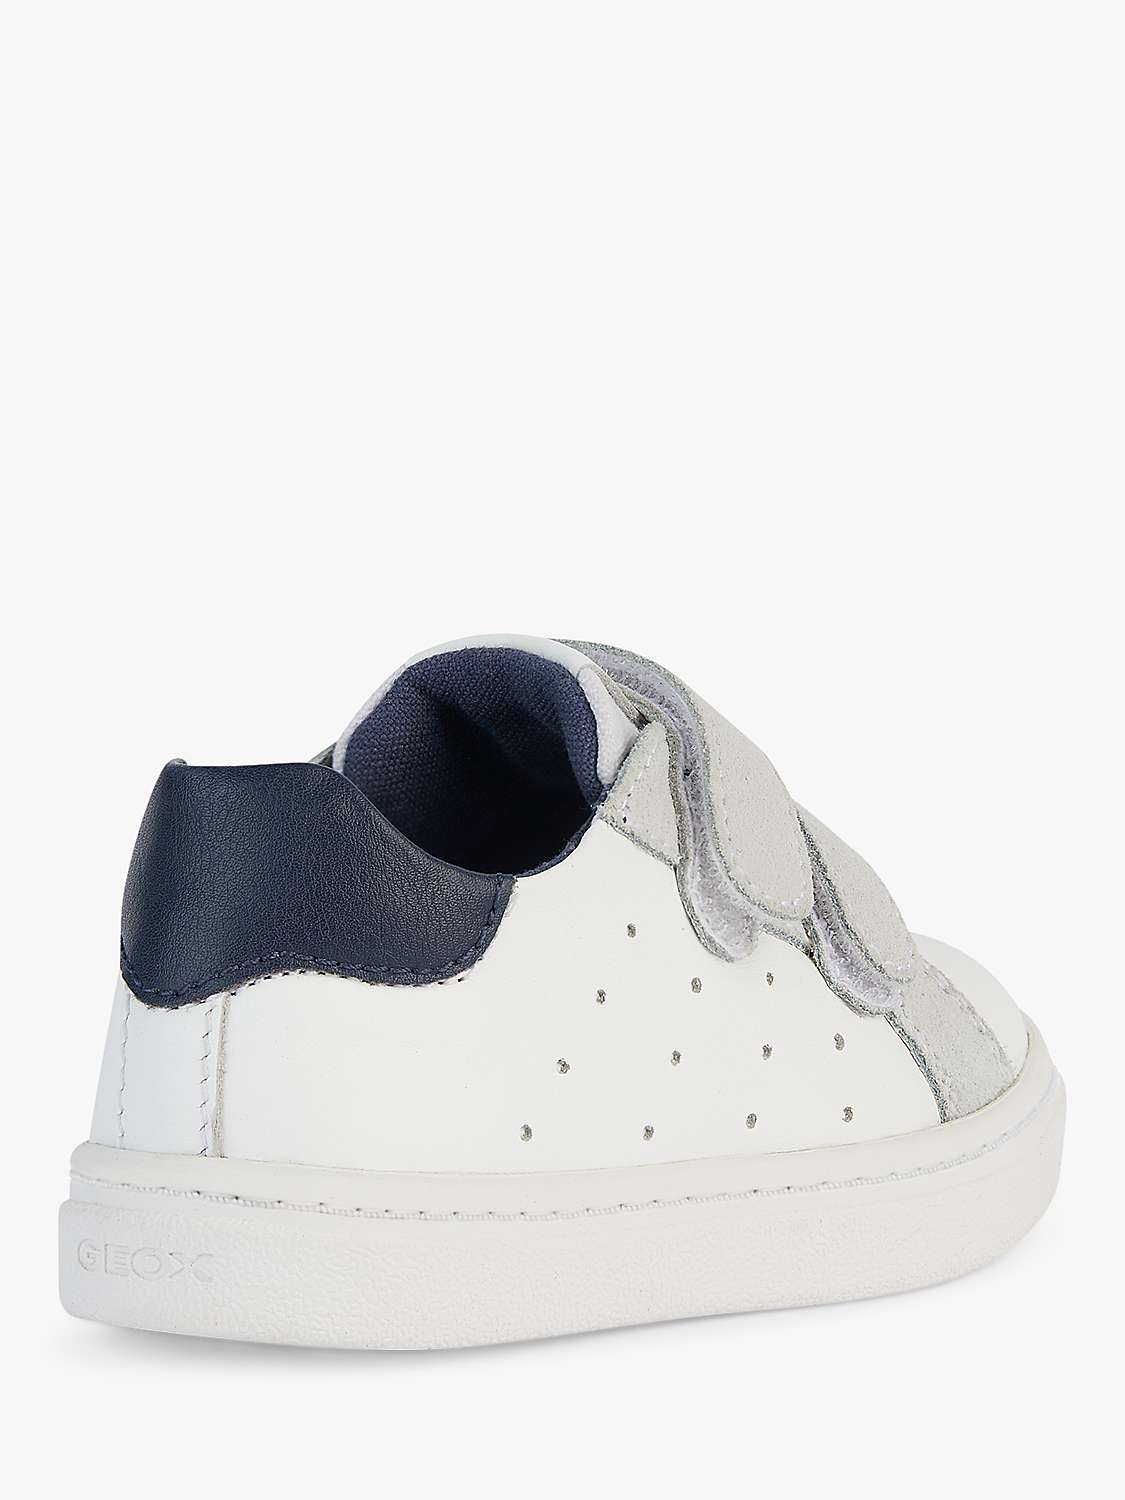 Buy Geox Baby Nashik Nappa Suede First Steps Trainers, White/Navy Online at johnlewis.com